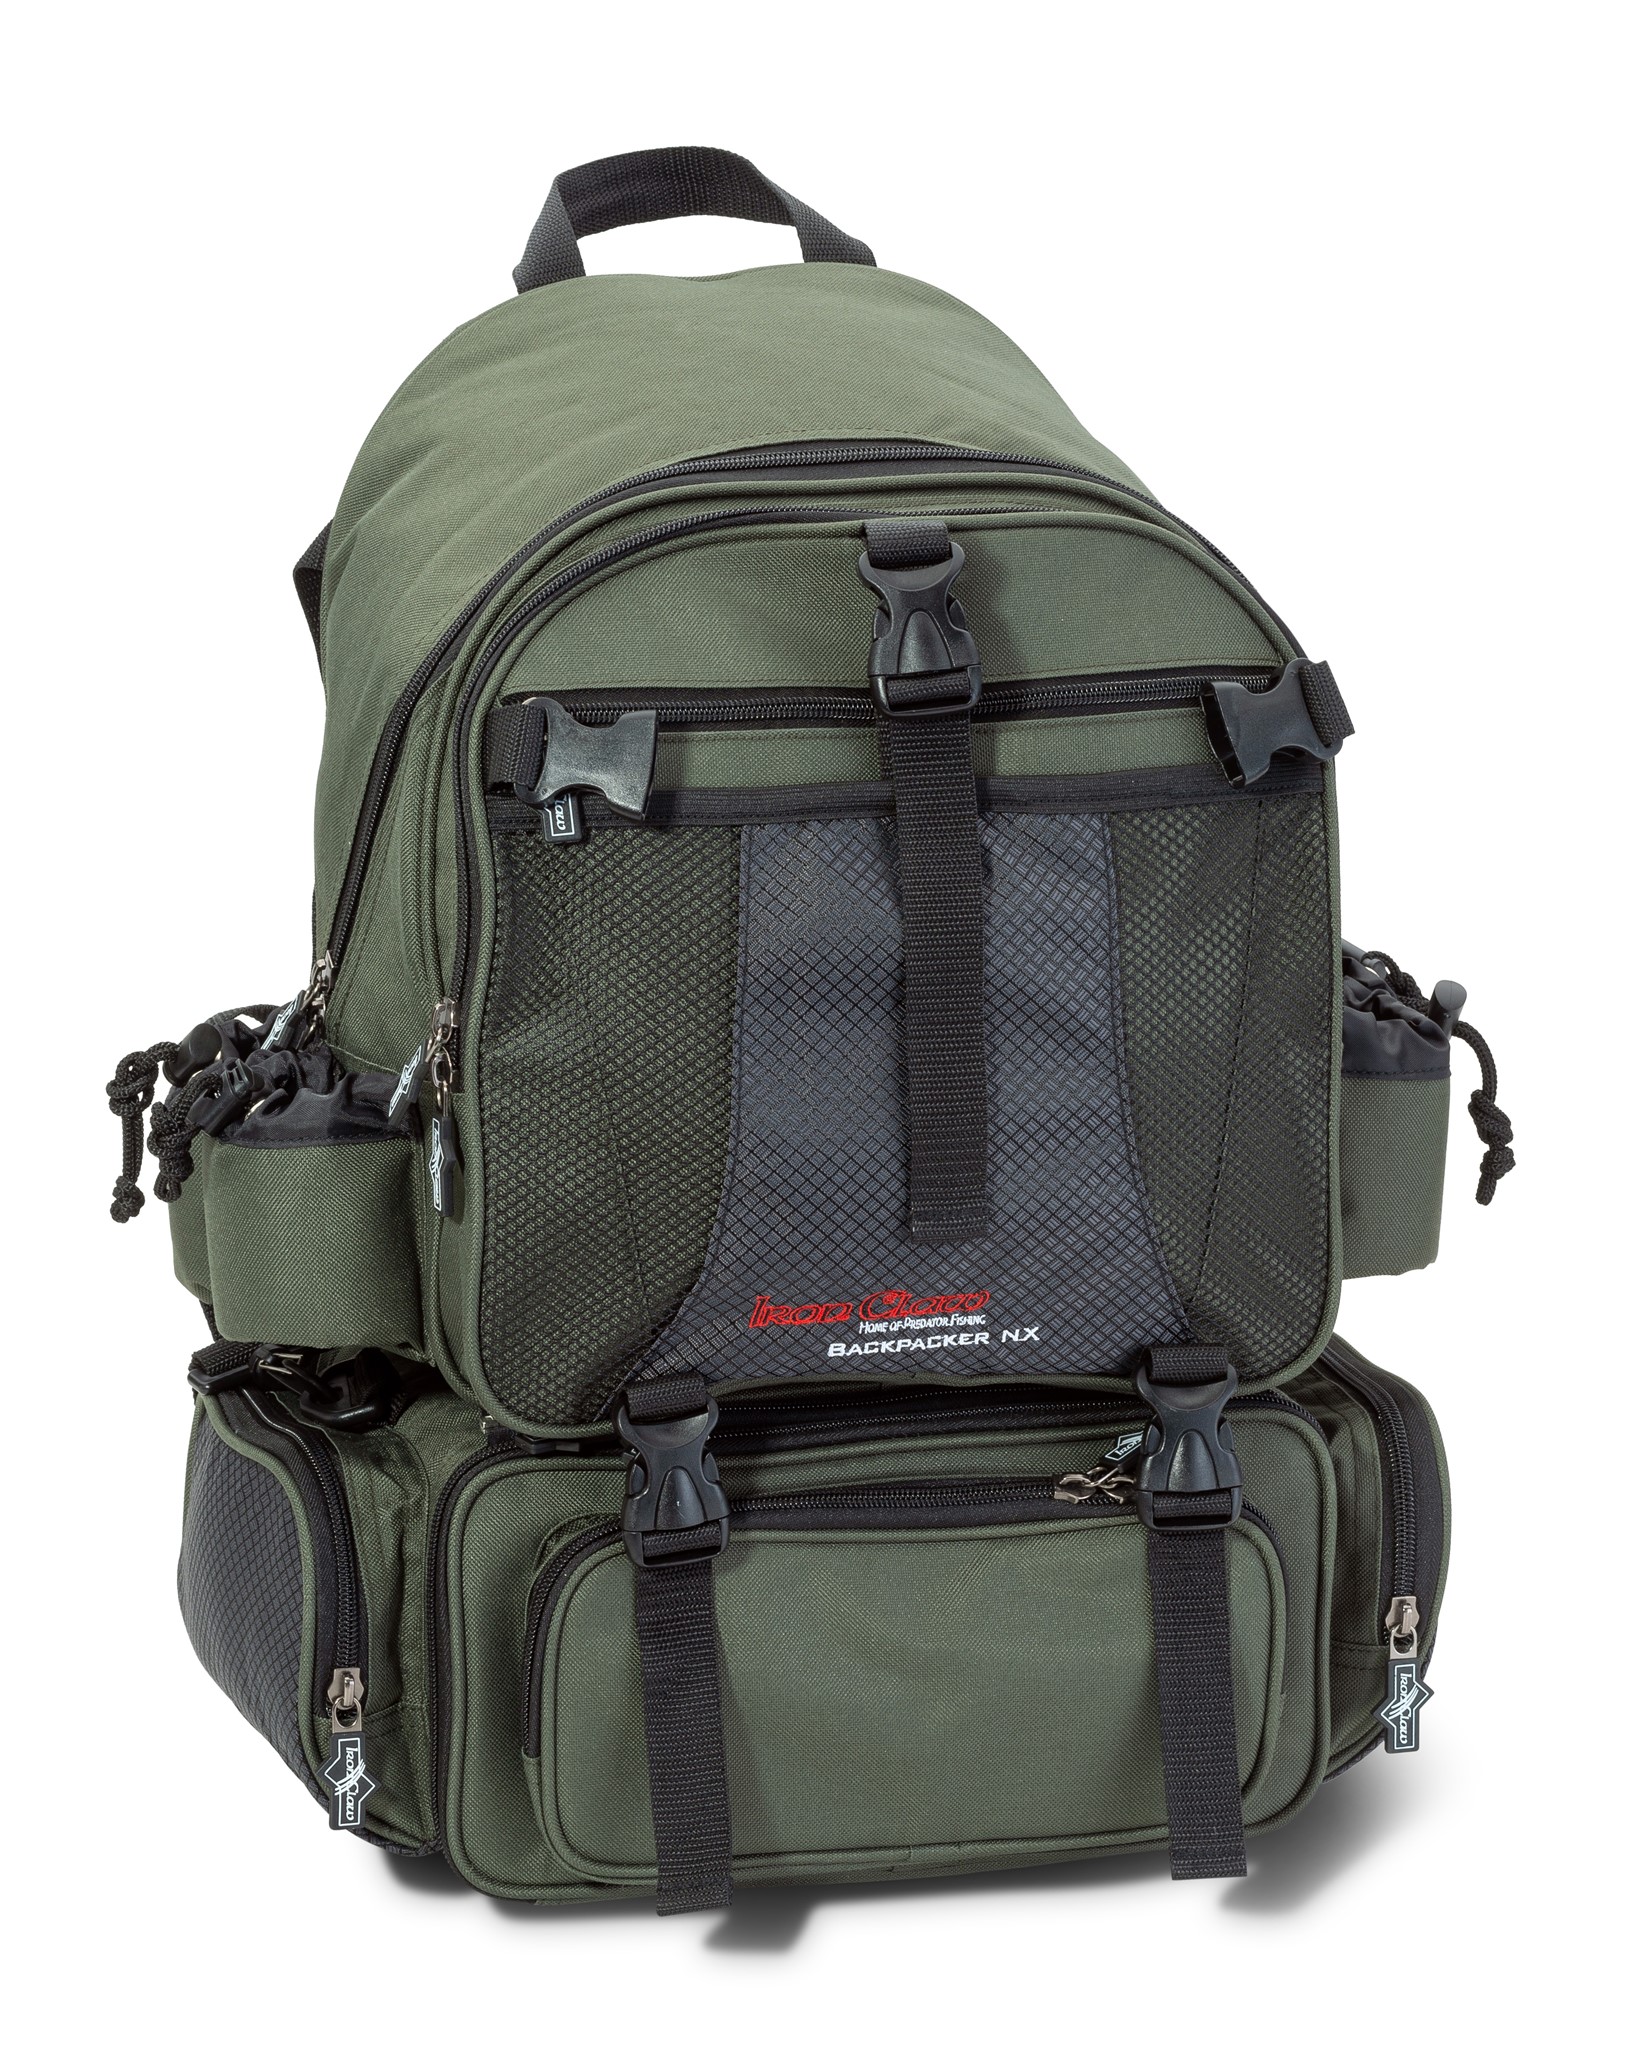 Image de IRON CLAW BACKPACKER NX